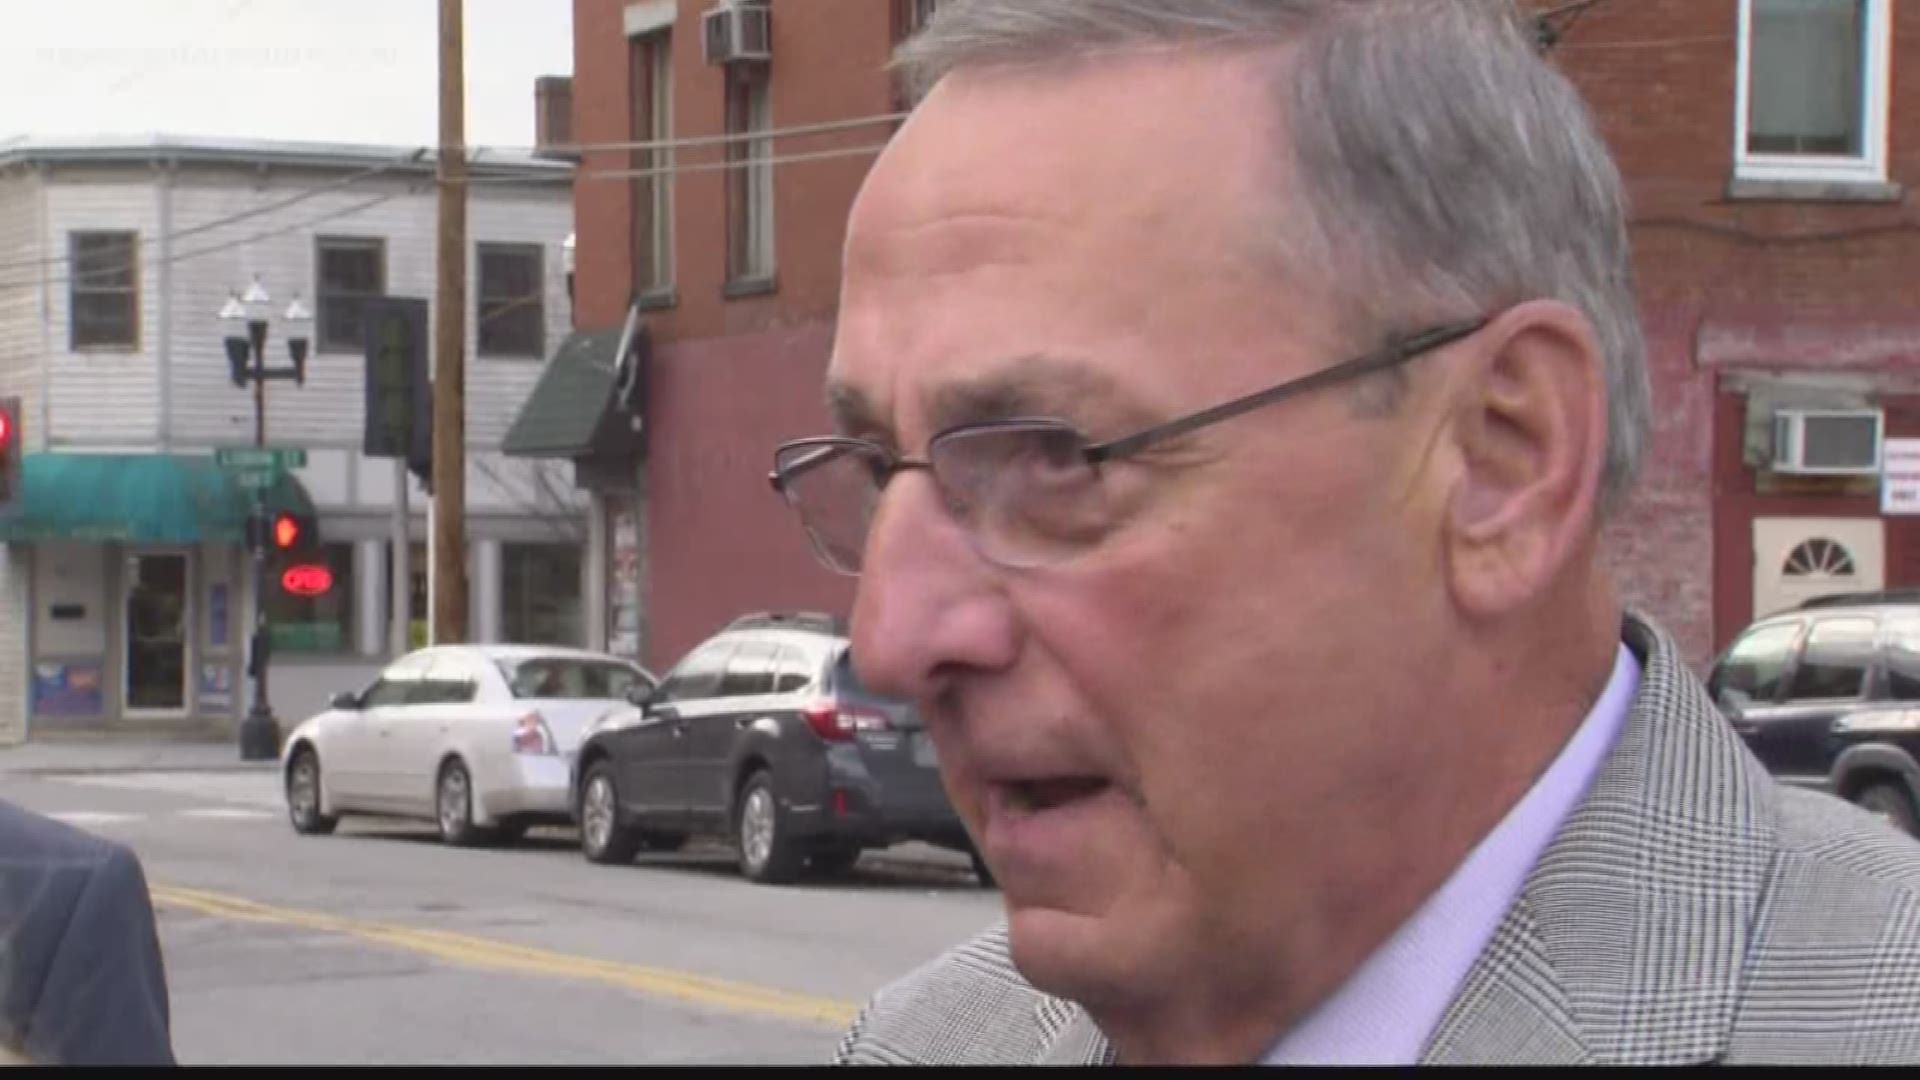 Gov. Lepage: Trump has made "overtures" about him joining the administration